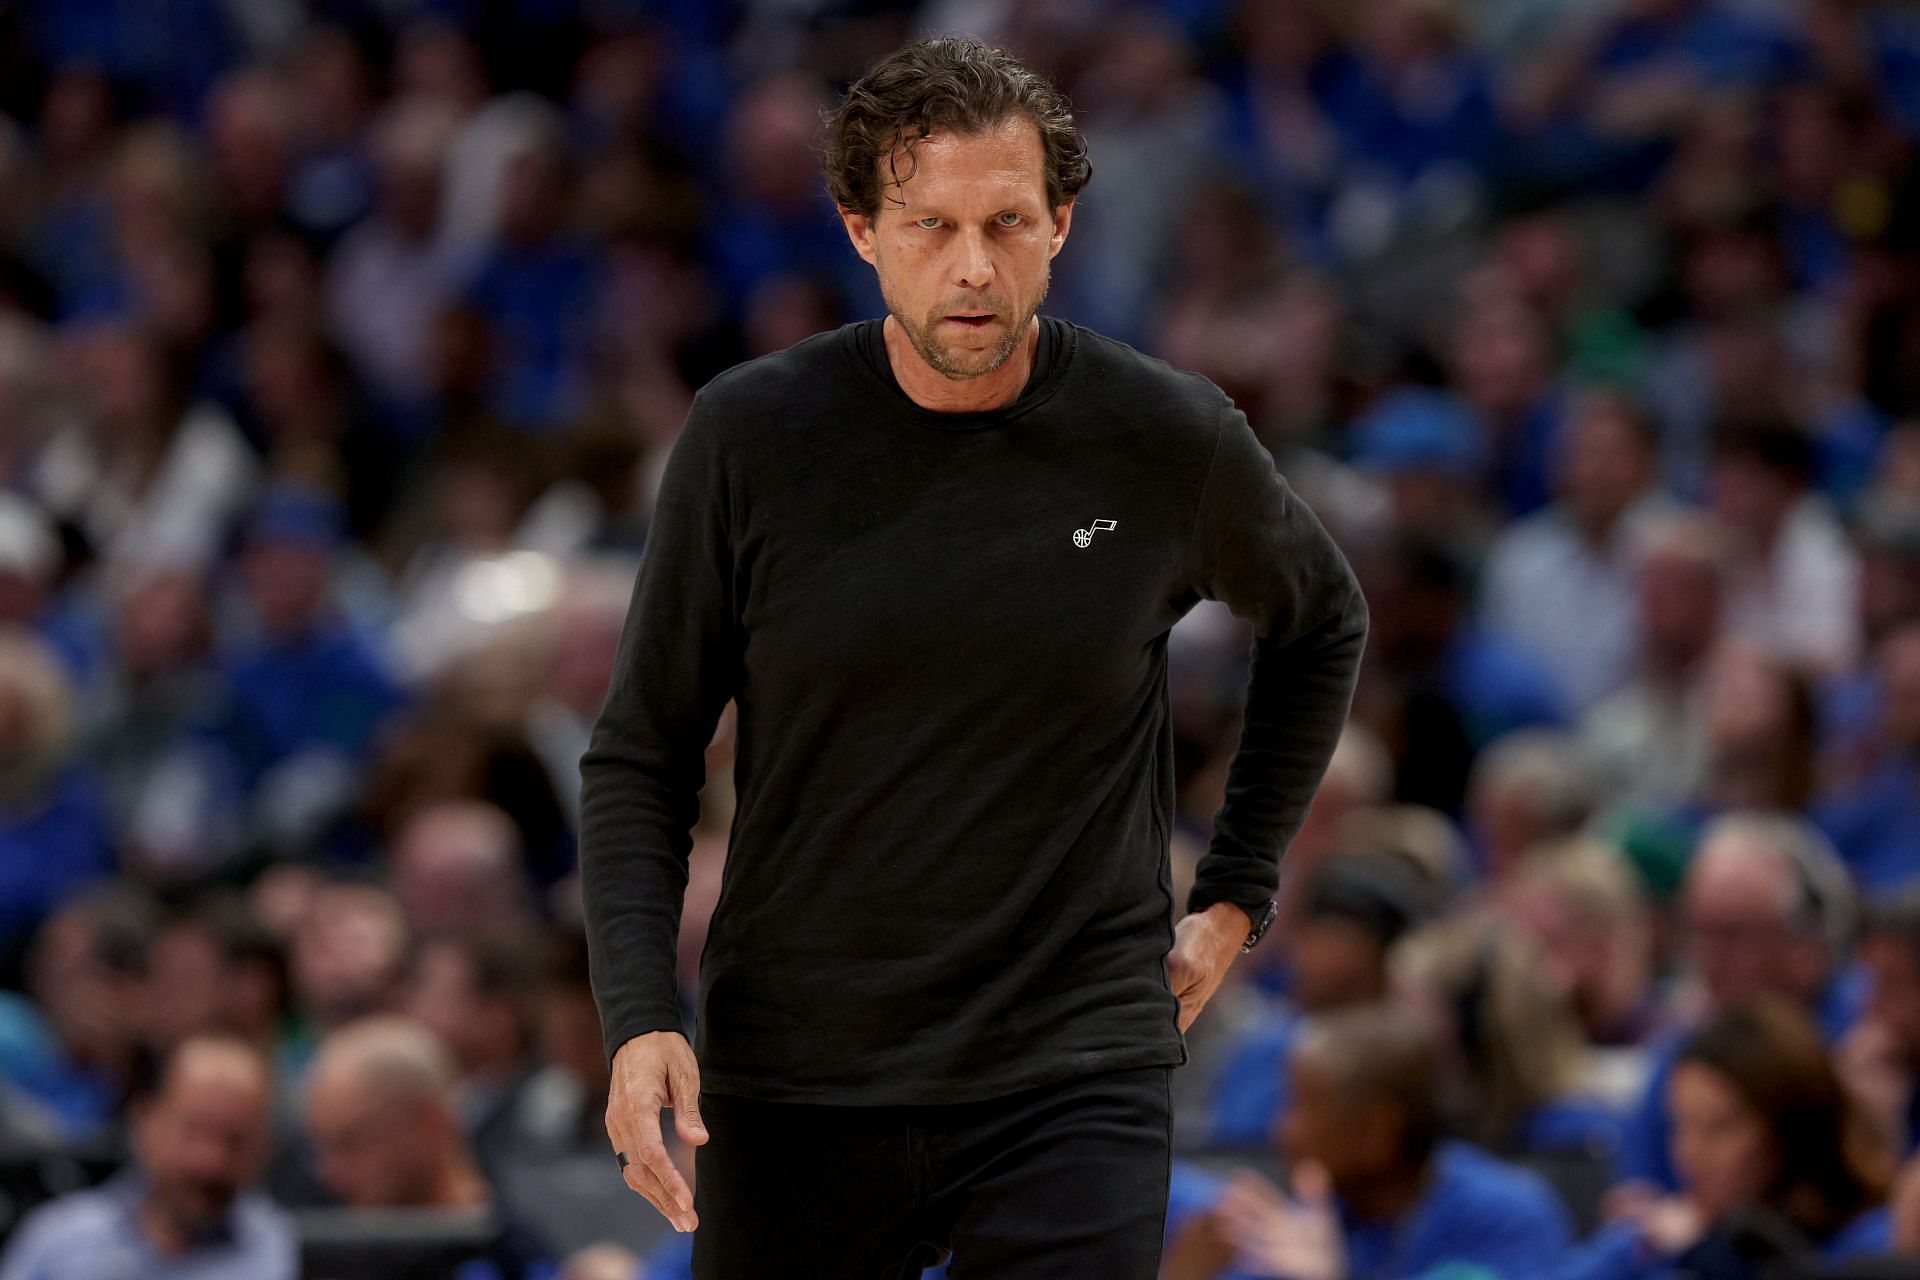 Coach Quin Snyder reacts as the Utah Jazz take on the Dallas Mavericks in Game 1 of their Western Conference first-round playoffs series at American Airlines Center on April 16 in Dallas, Texas.